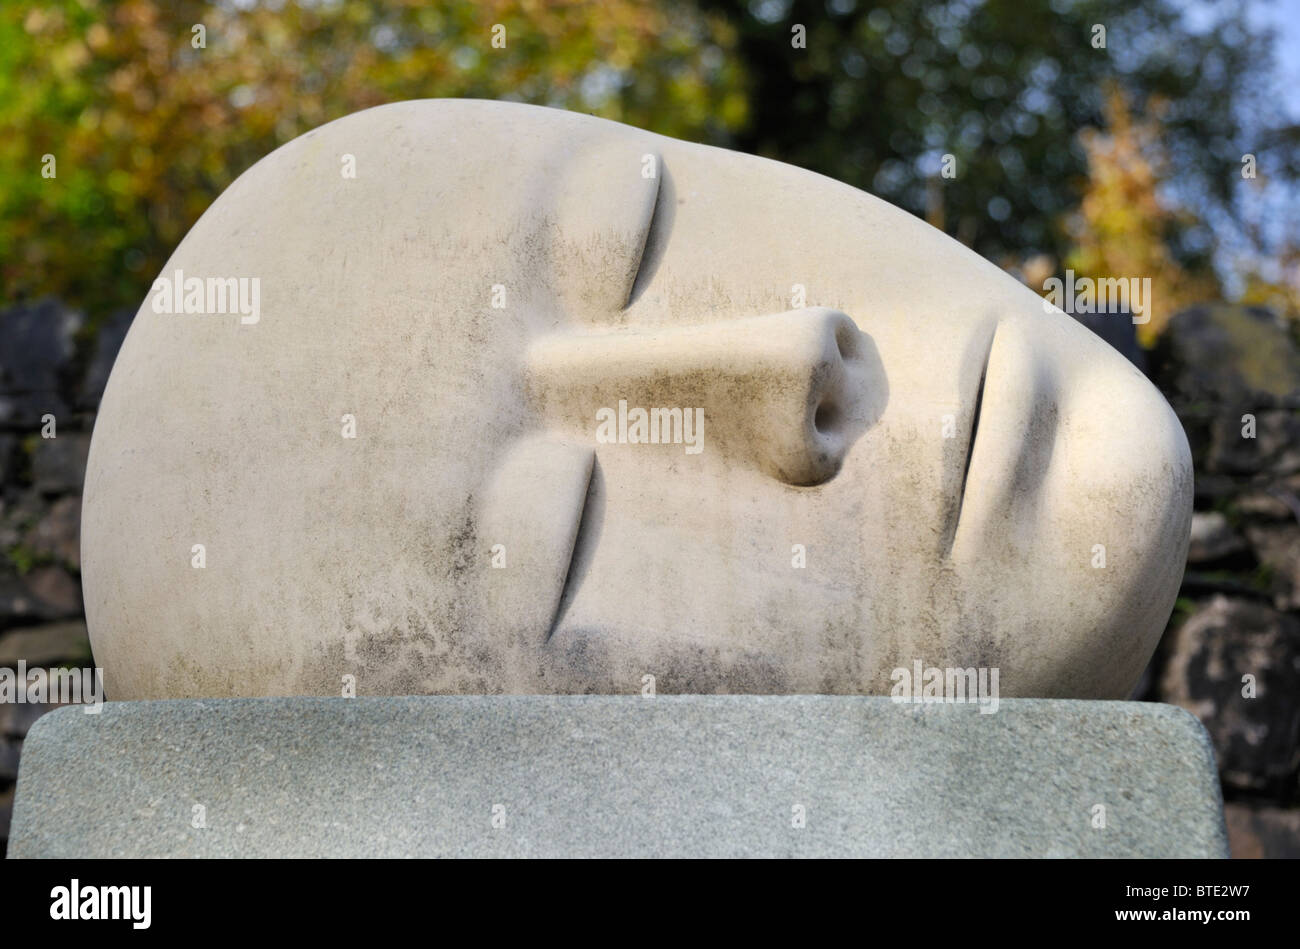 'Dreamer' 2009, outdoor sculpture by Daniel Clahane. Brewery Arts Centre, Kendal, Cumbria, England, United Kingdom, Europe. Stock Photo